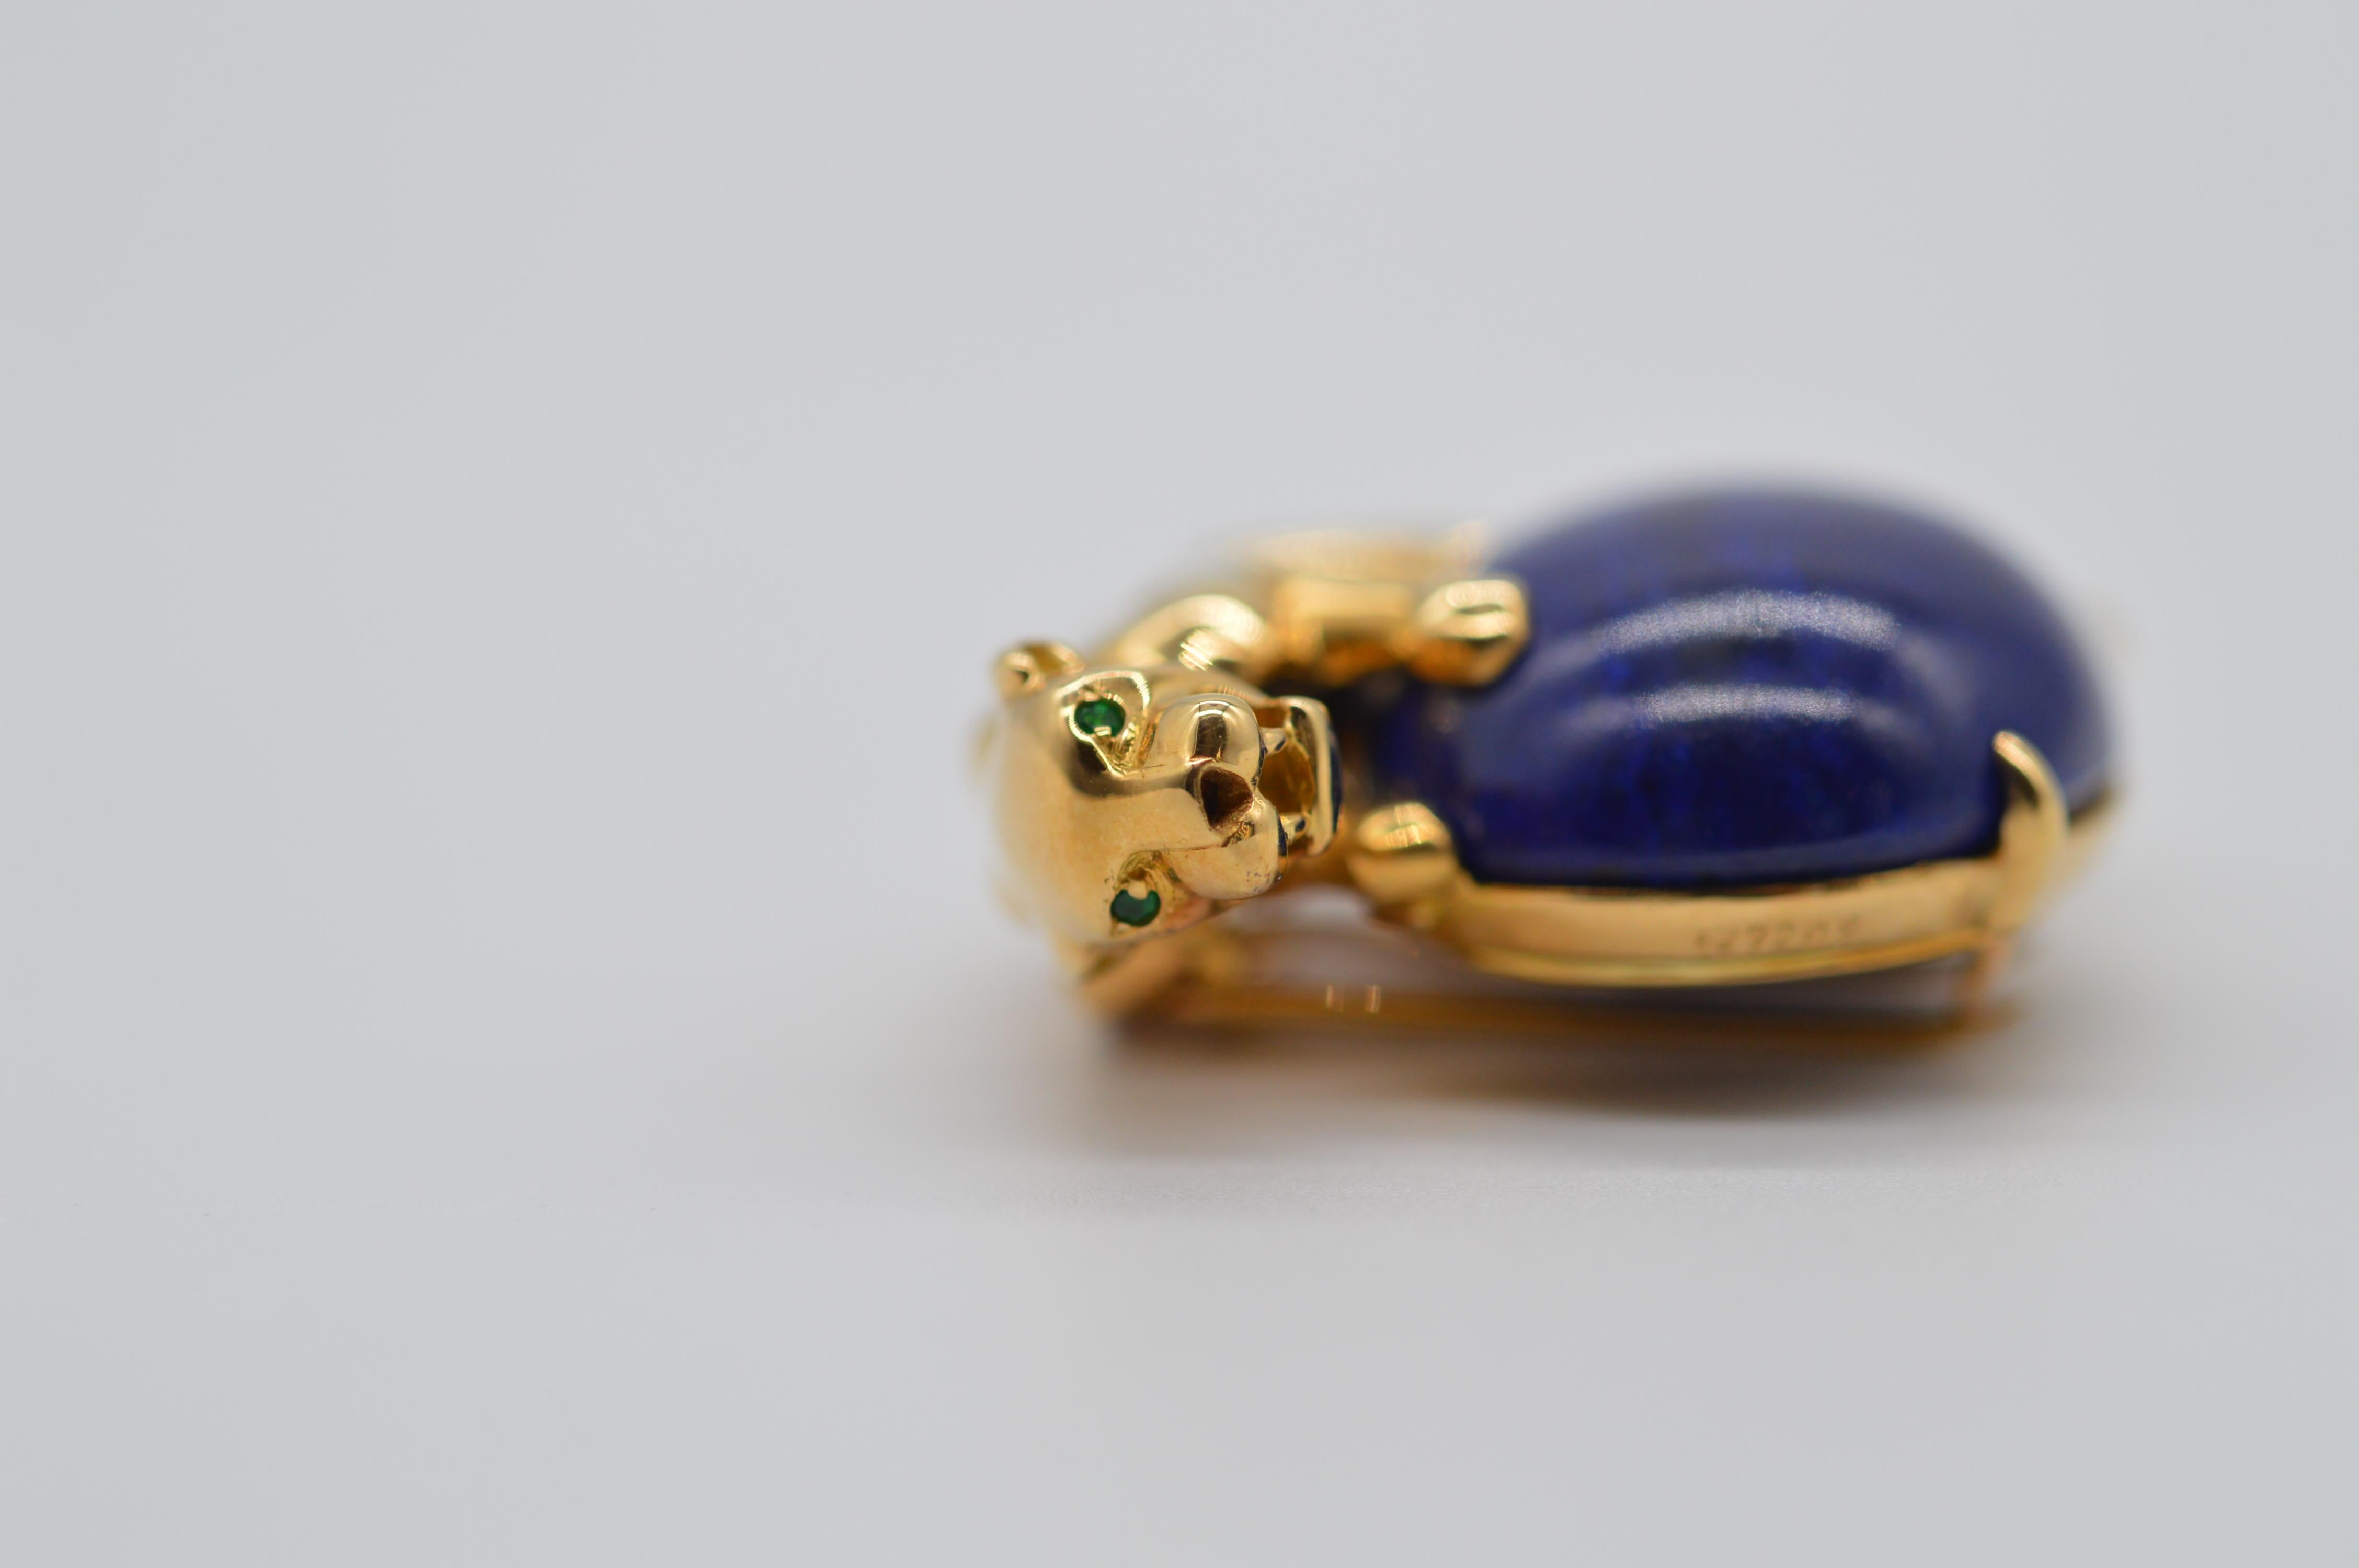 Cabochon Cartier Panthère Lapis Lazuli 18K Yellow Gold Brooch with Emerald Eyes Unworn For Sale